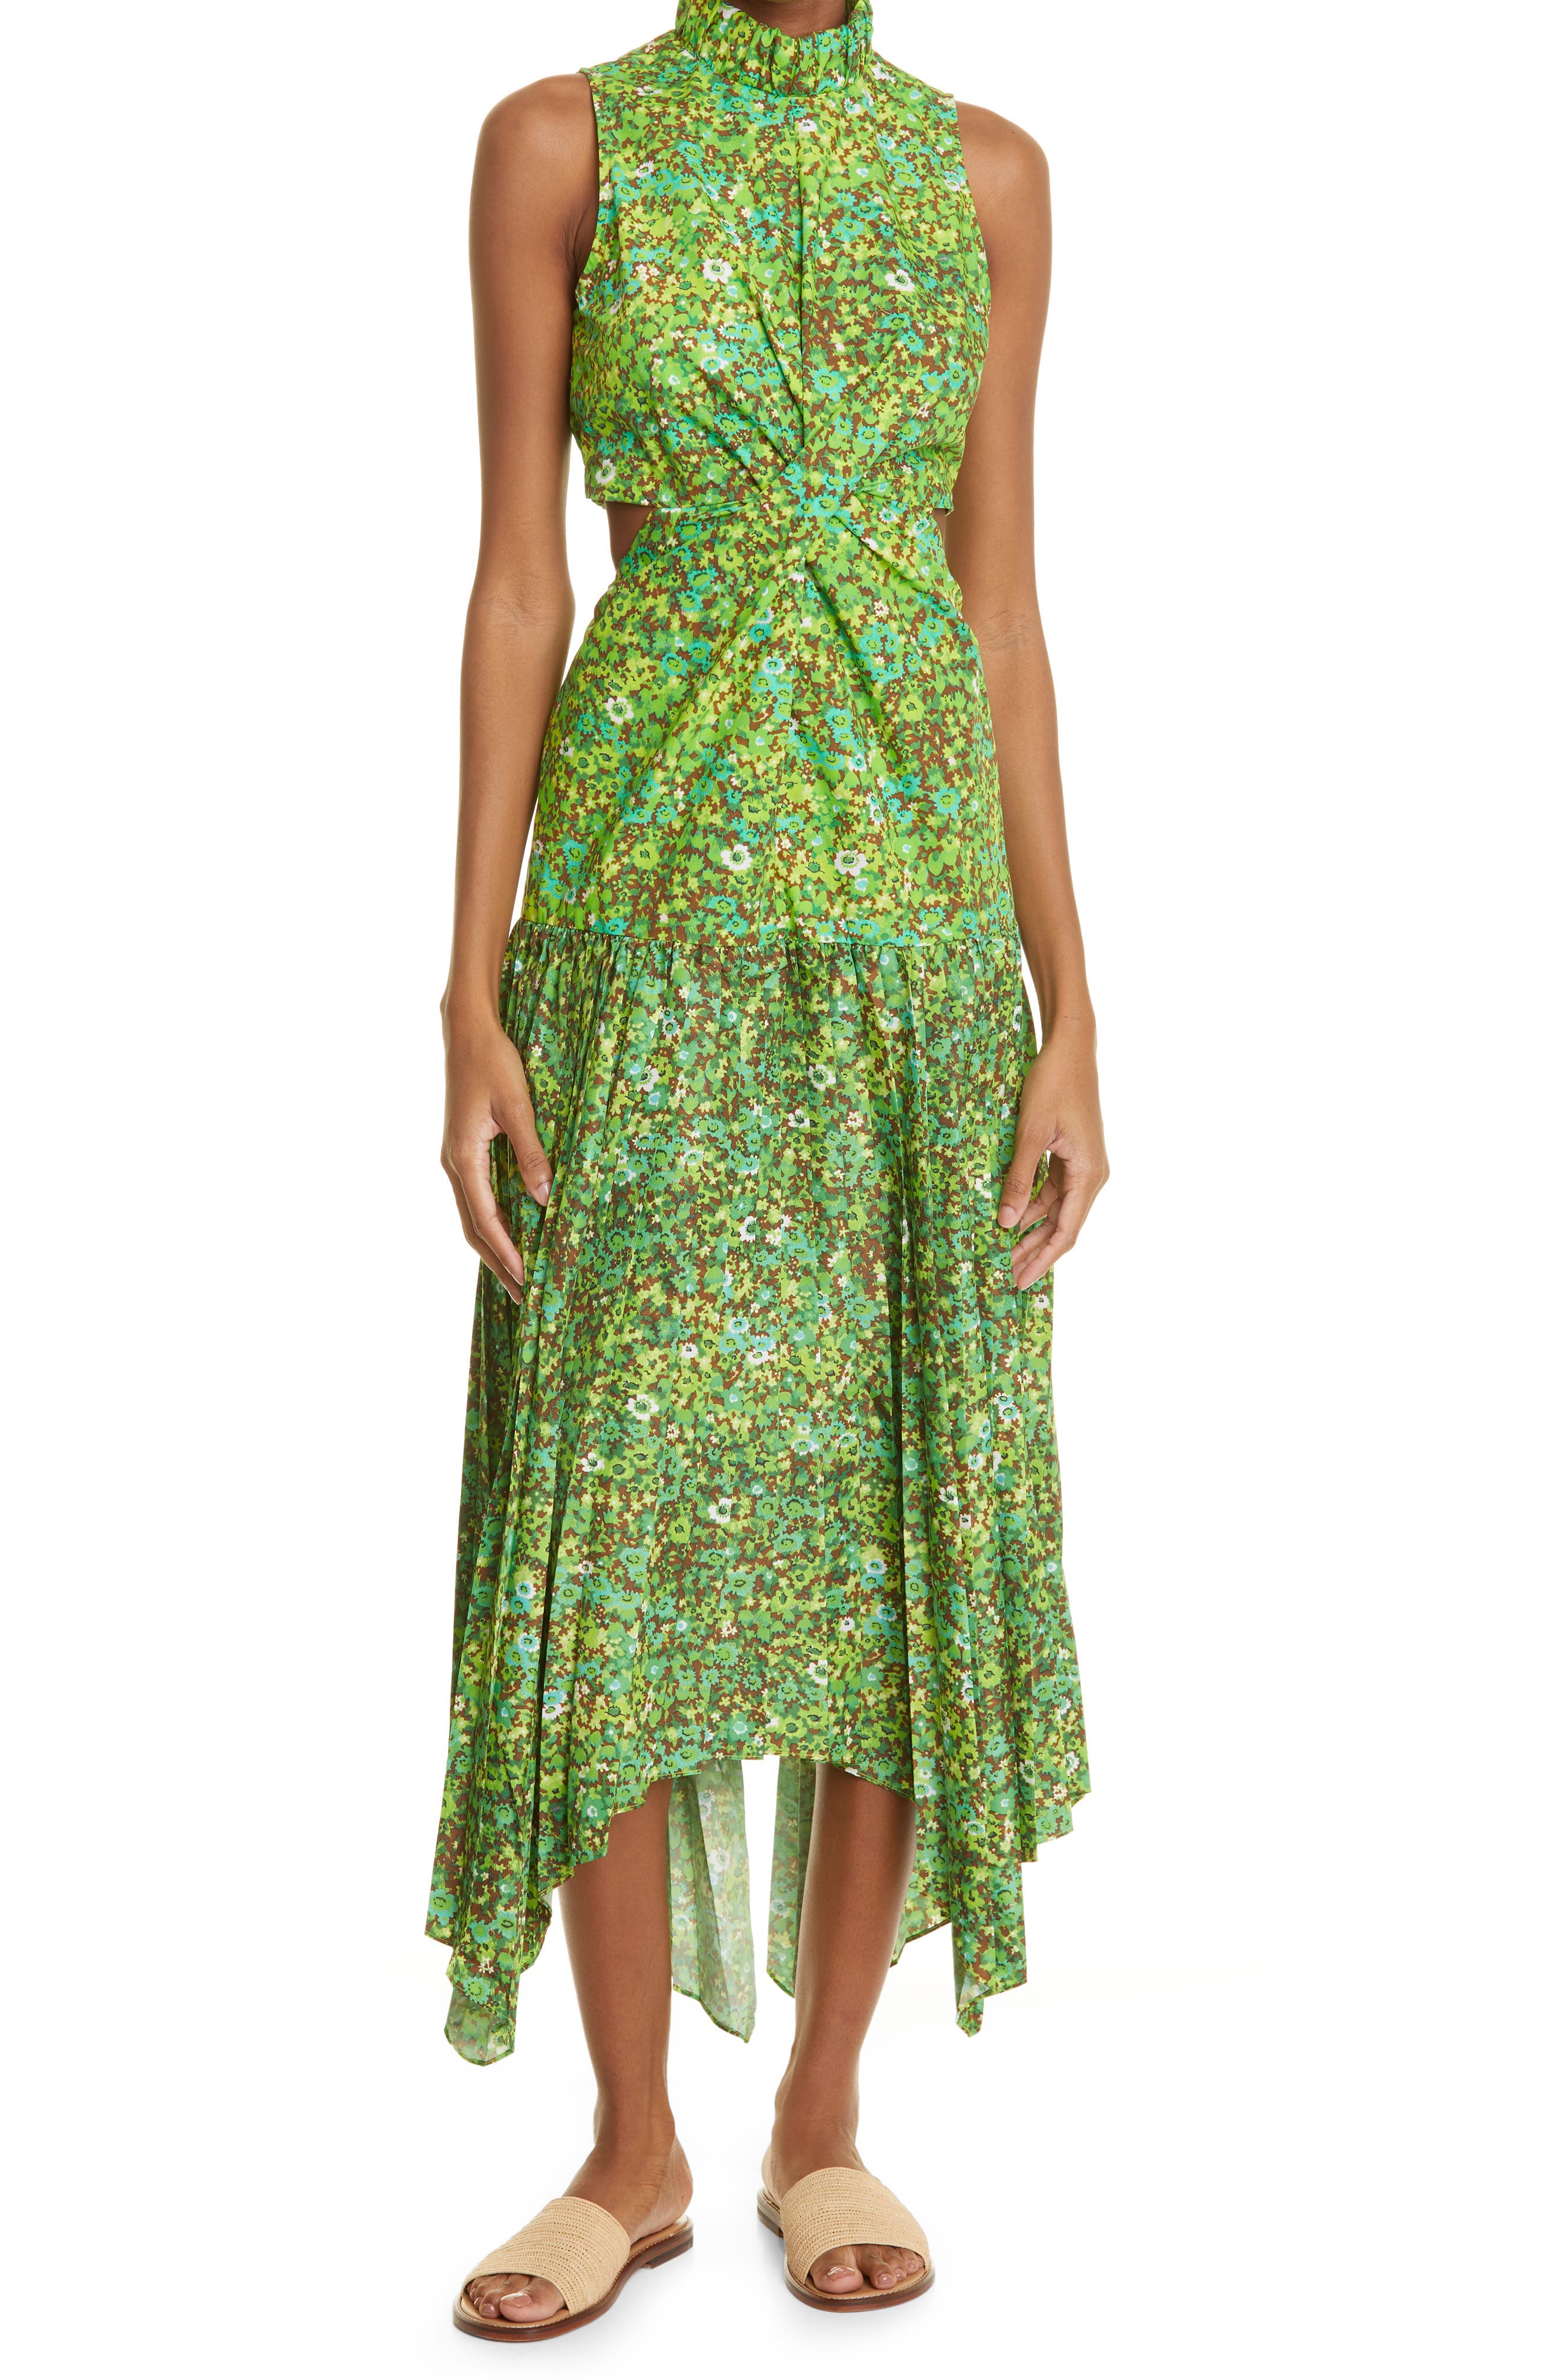 ALEMAIS Pleated Phyllis Dress in Acid Green at Nordstrom, Size 8